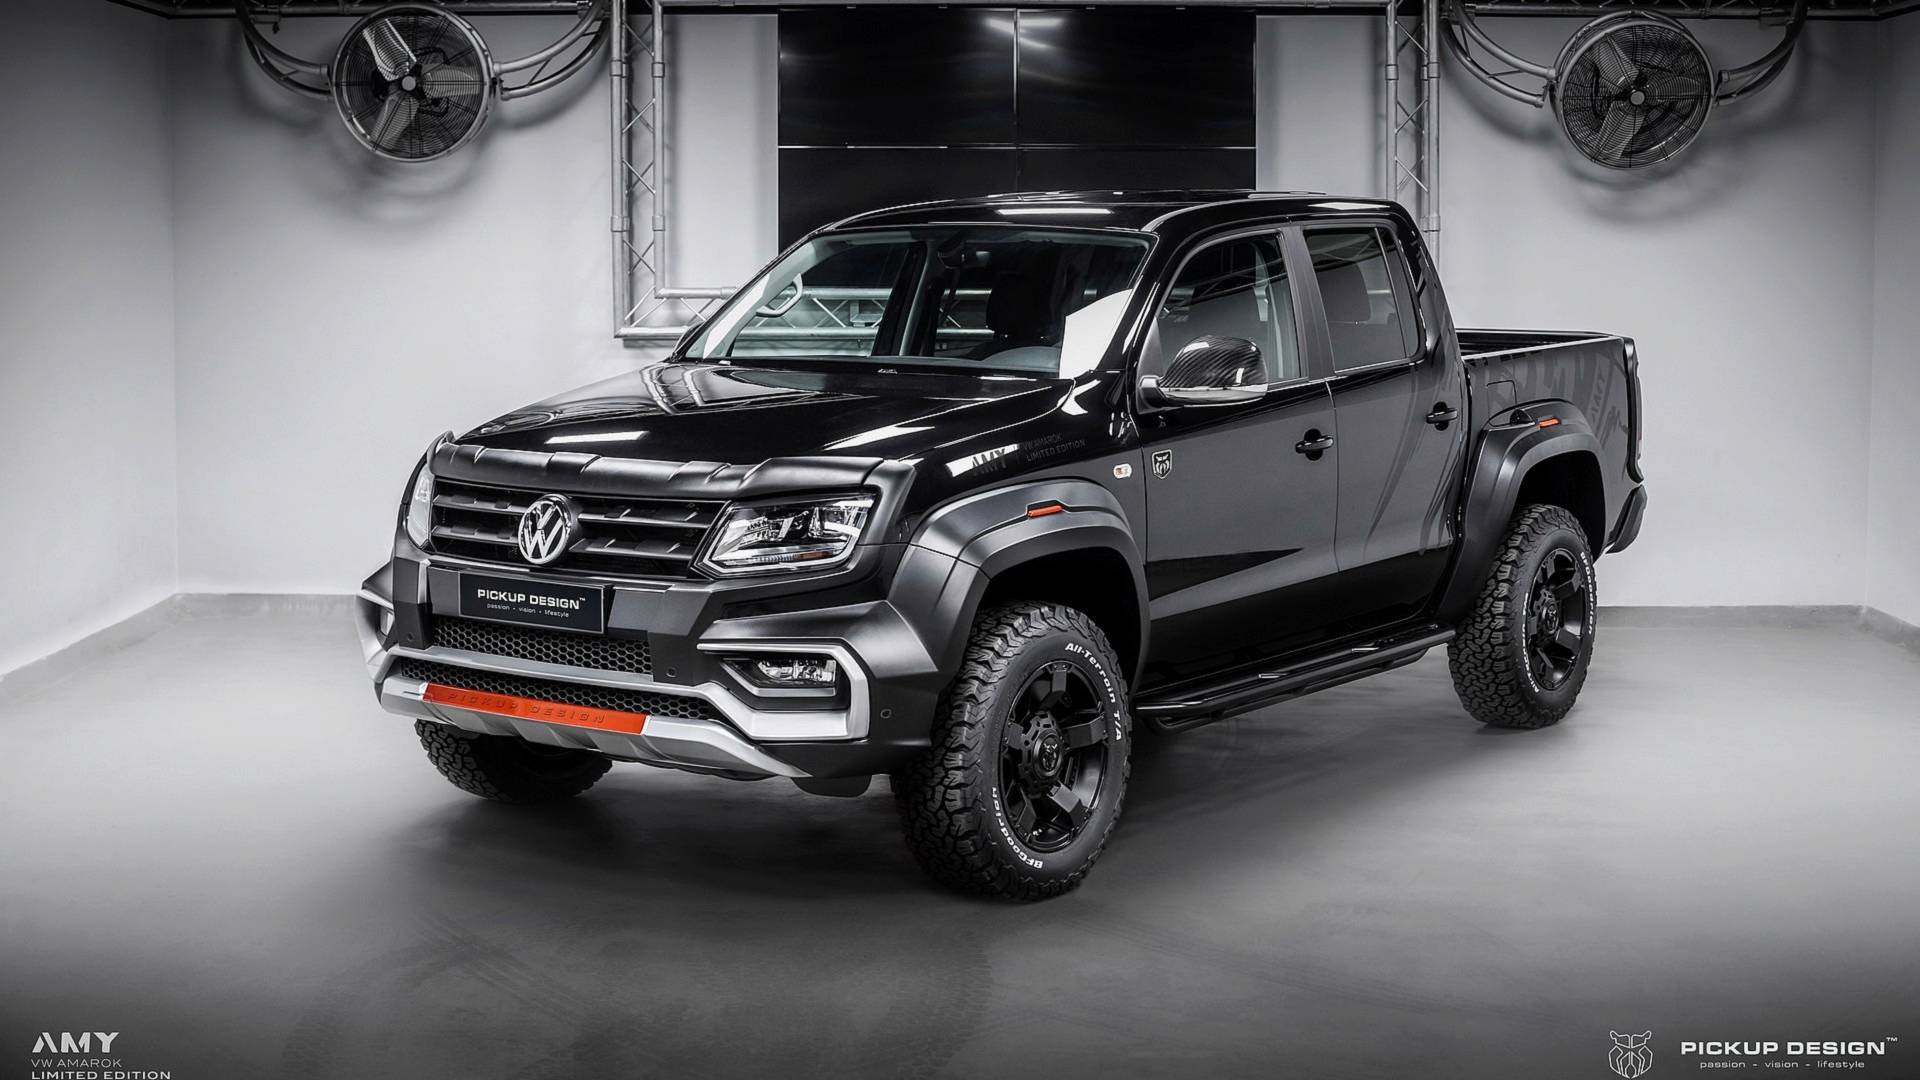 Customized Ford Ranger By Carlex Design Looks Ready To Go Off-Road